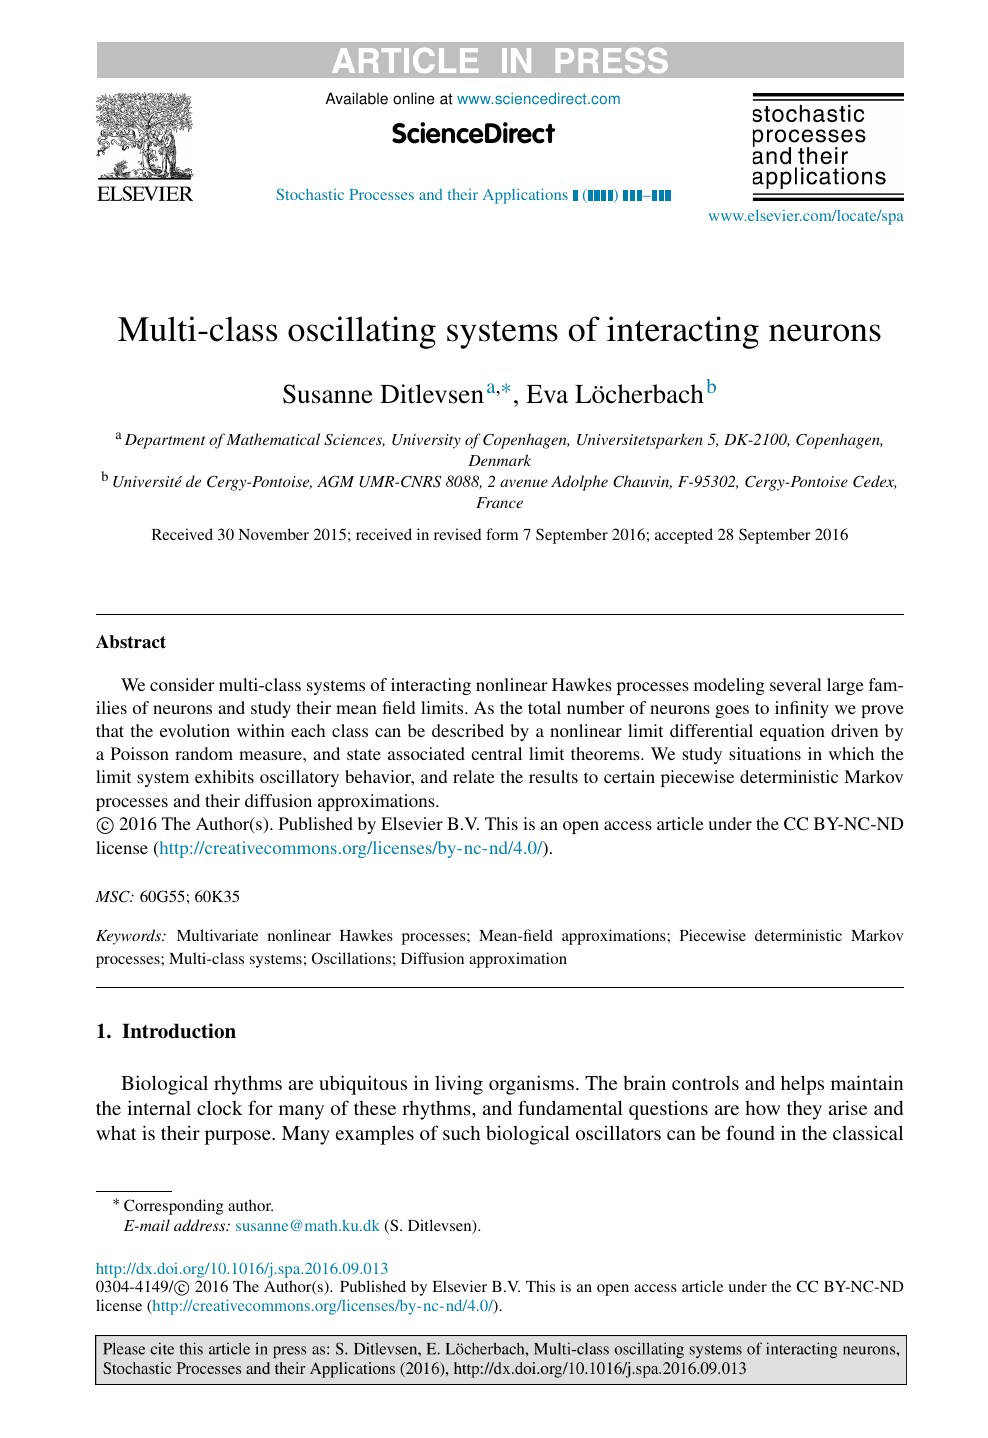 Multi Class Oscillating Systems Of Interacting Neurons Topic Of Research Paper In Mathematics Download Scholarly Article Pdf And Read For Free On Cyberleninka Open Science Hub